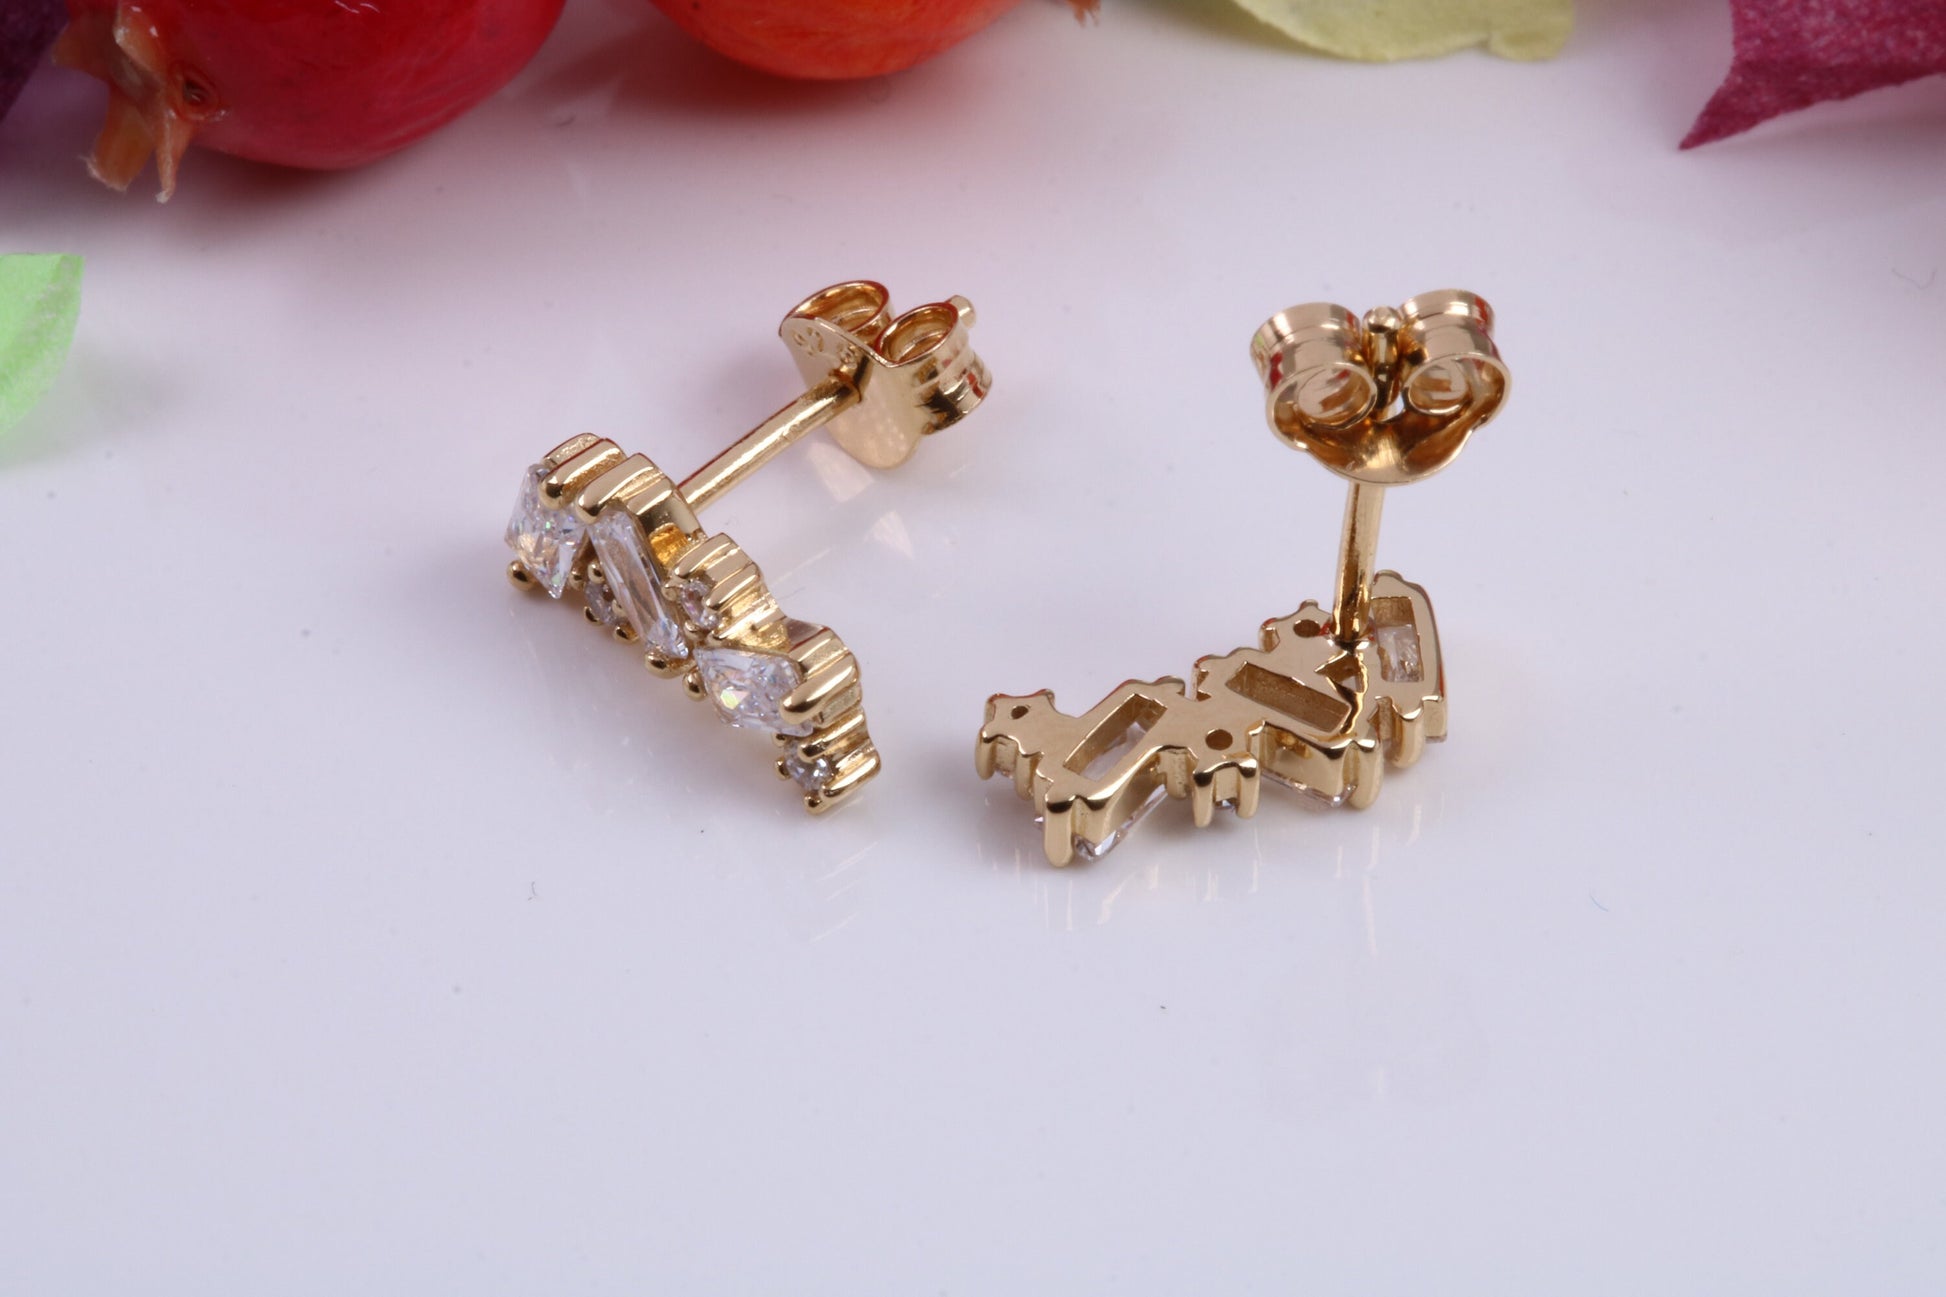 12 mm Long Cubic Zirconia set Earrings, Made from Solid 925 Grade Sterling Silver and 18ct Yellow Gold Plated